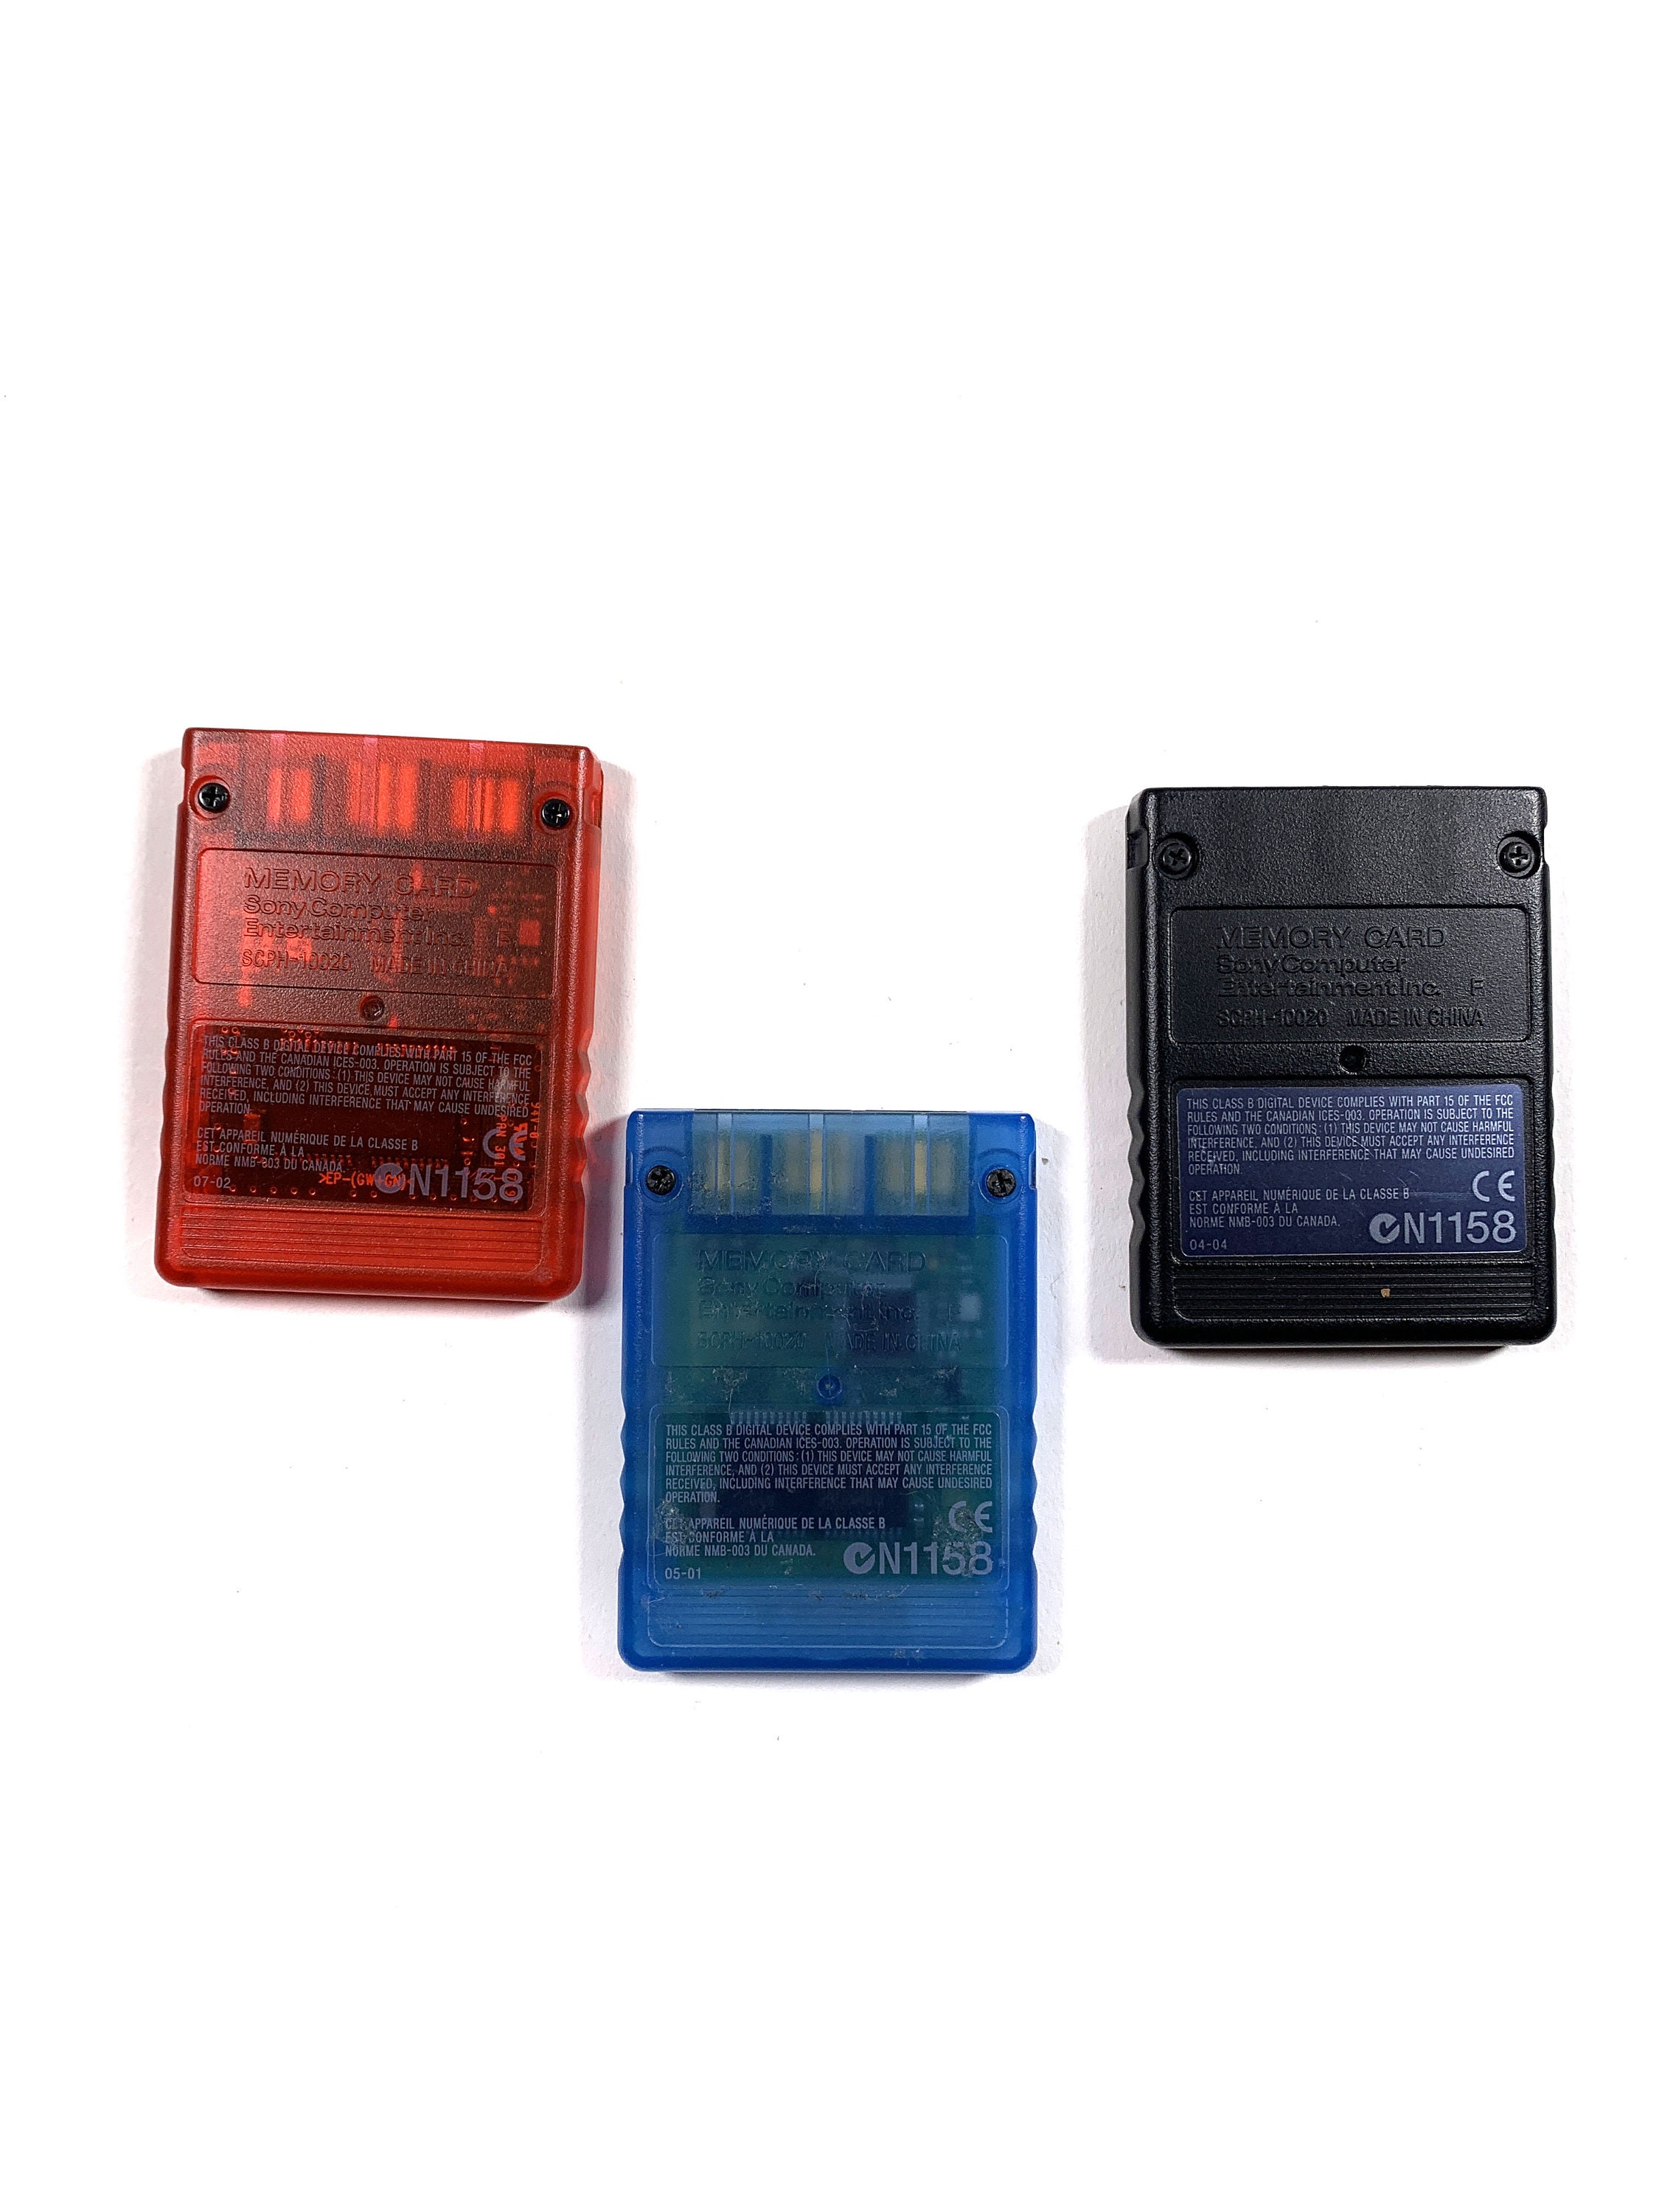 Buy3rd Party Memory Card 8mb Playstation 2 PS3 For Sale